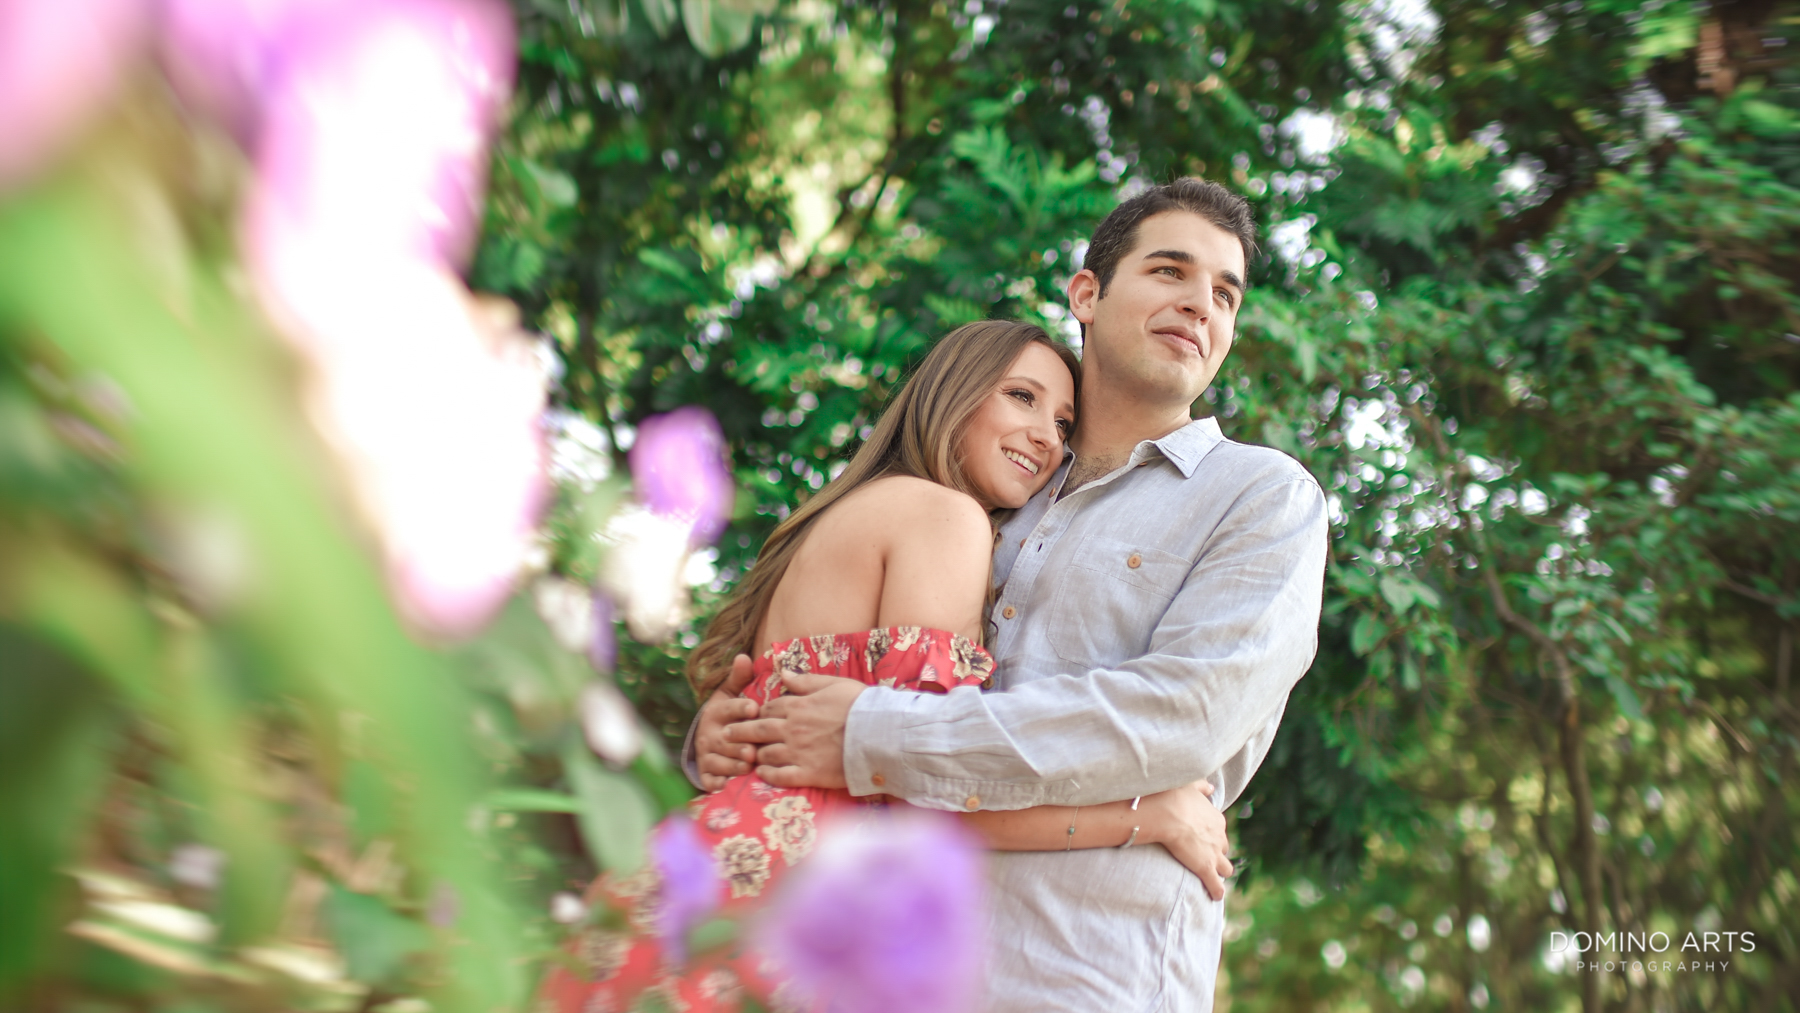 Cute Romantic Outdoor Engagement Photography at Morikami Museum and Japanese Gardens